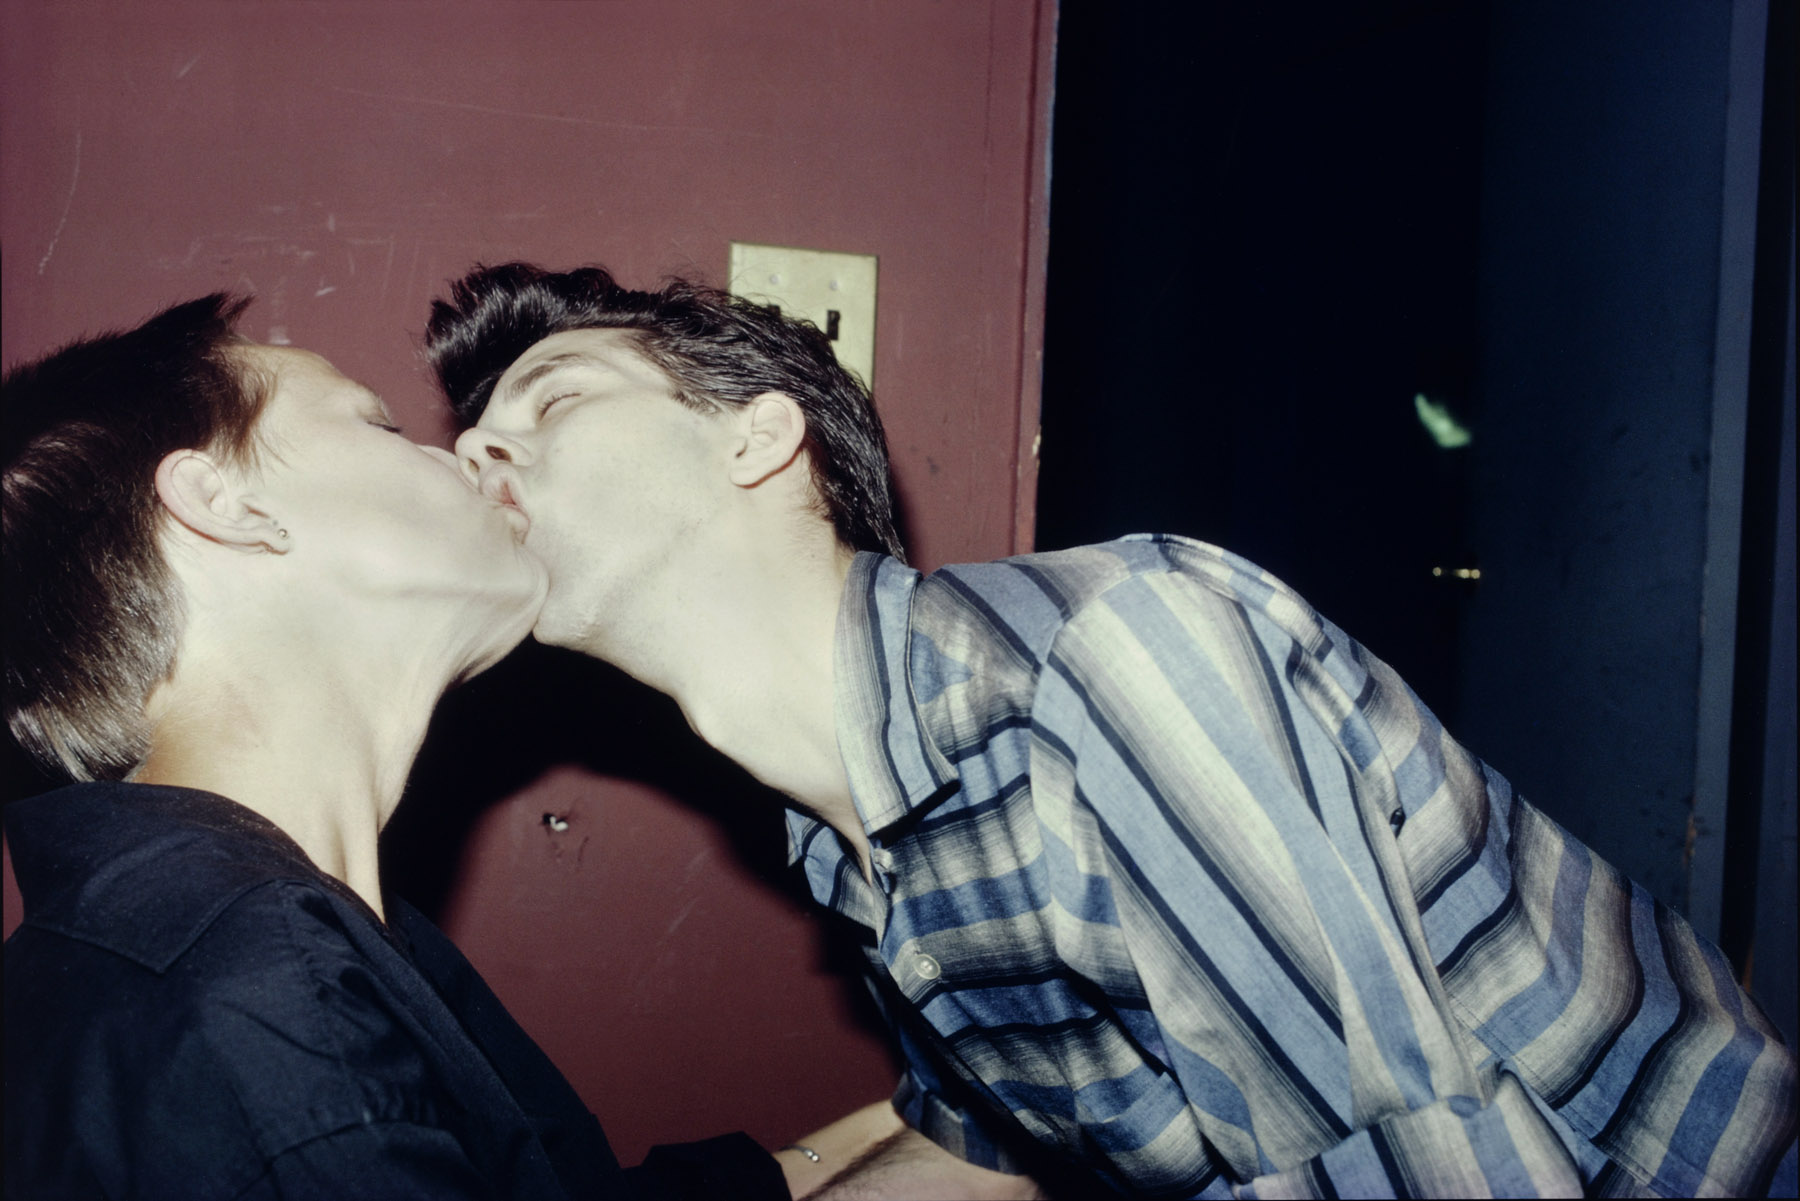 Philippe H. and Suzanne Kissing at Euthanasia, New York City